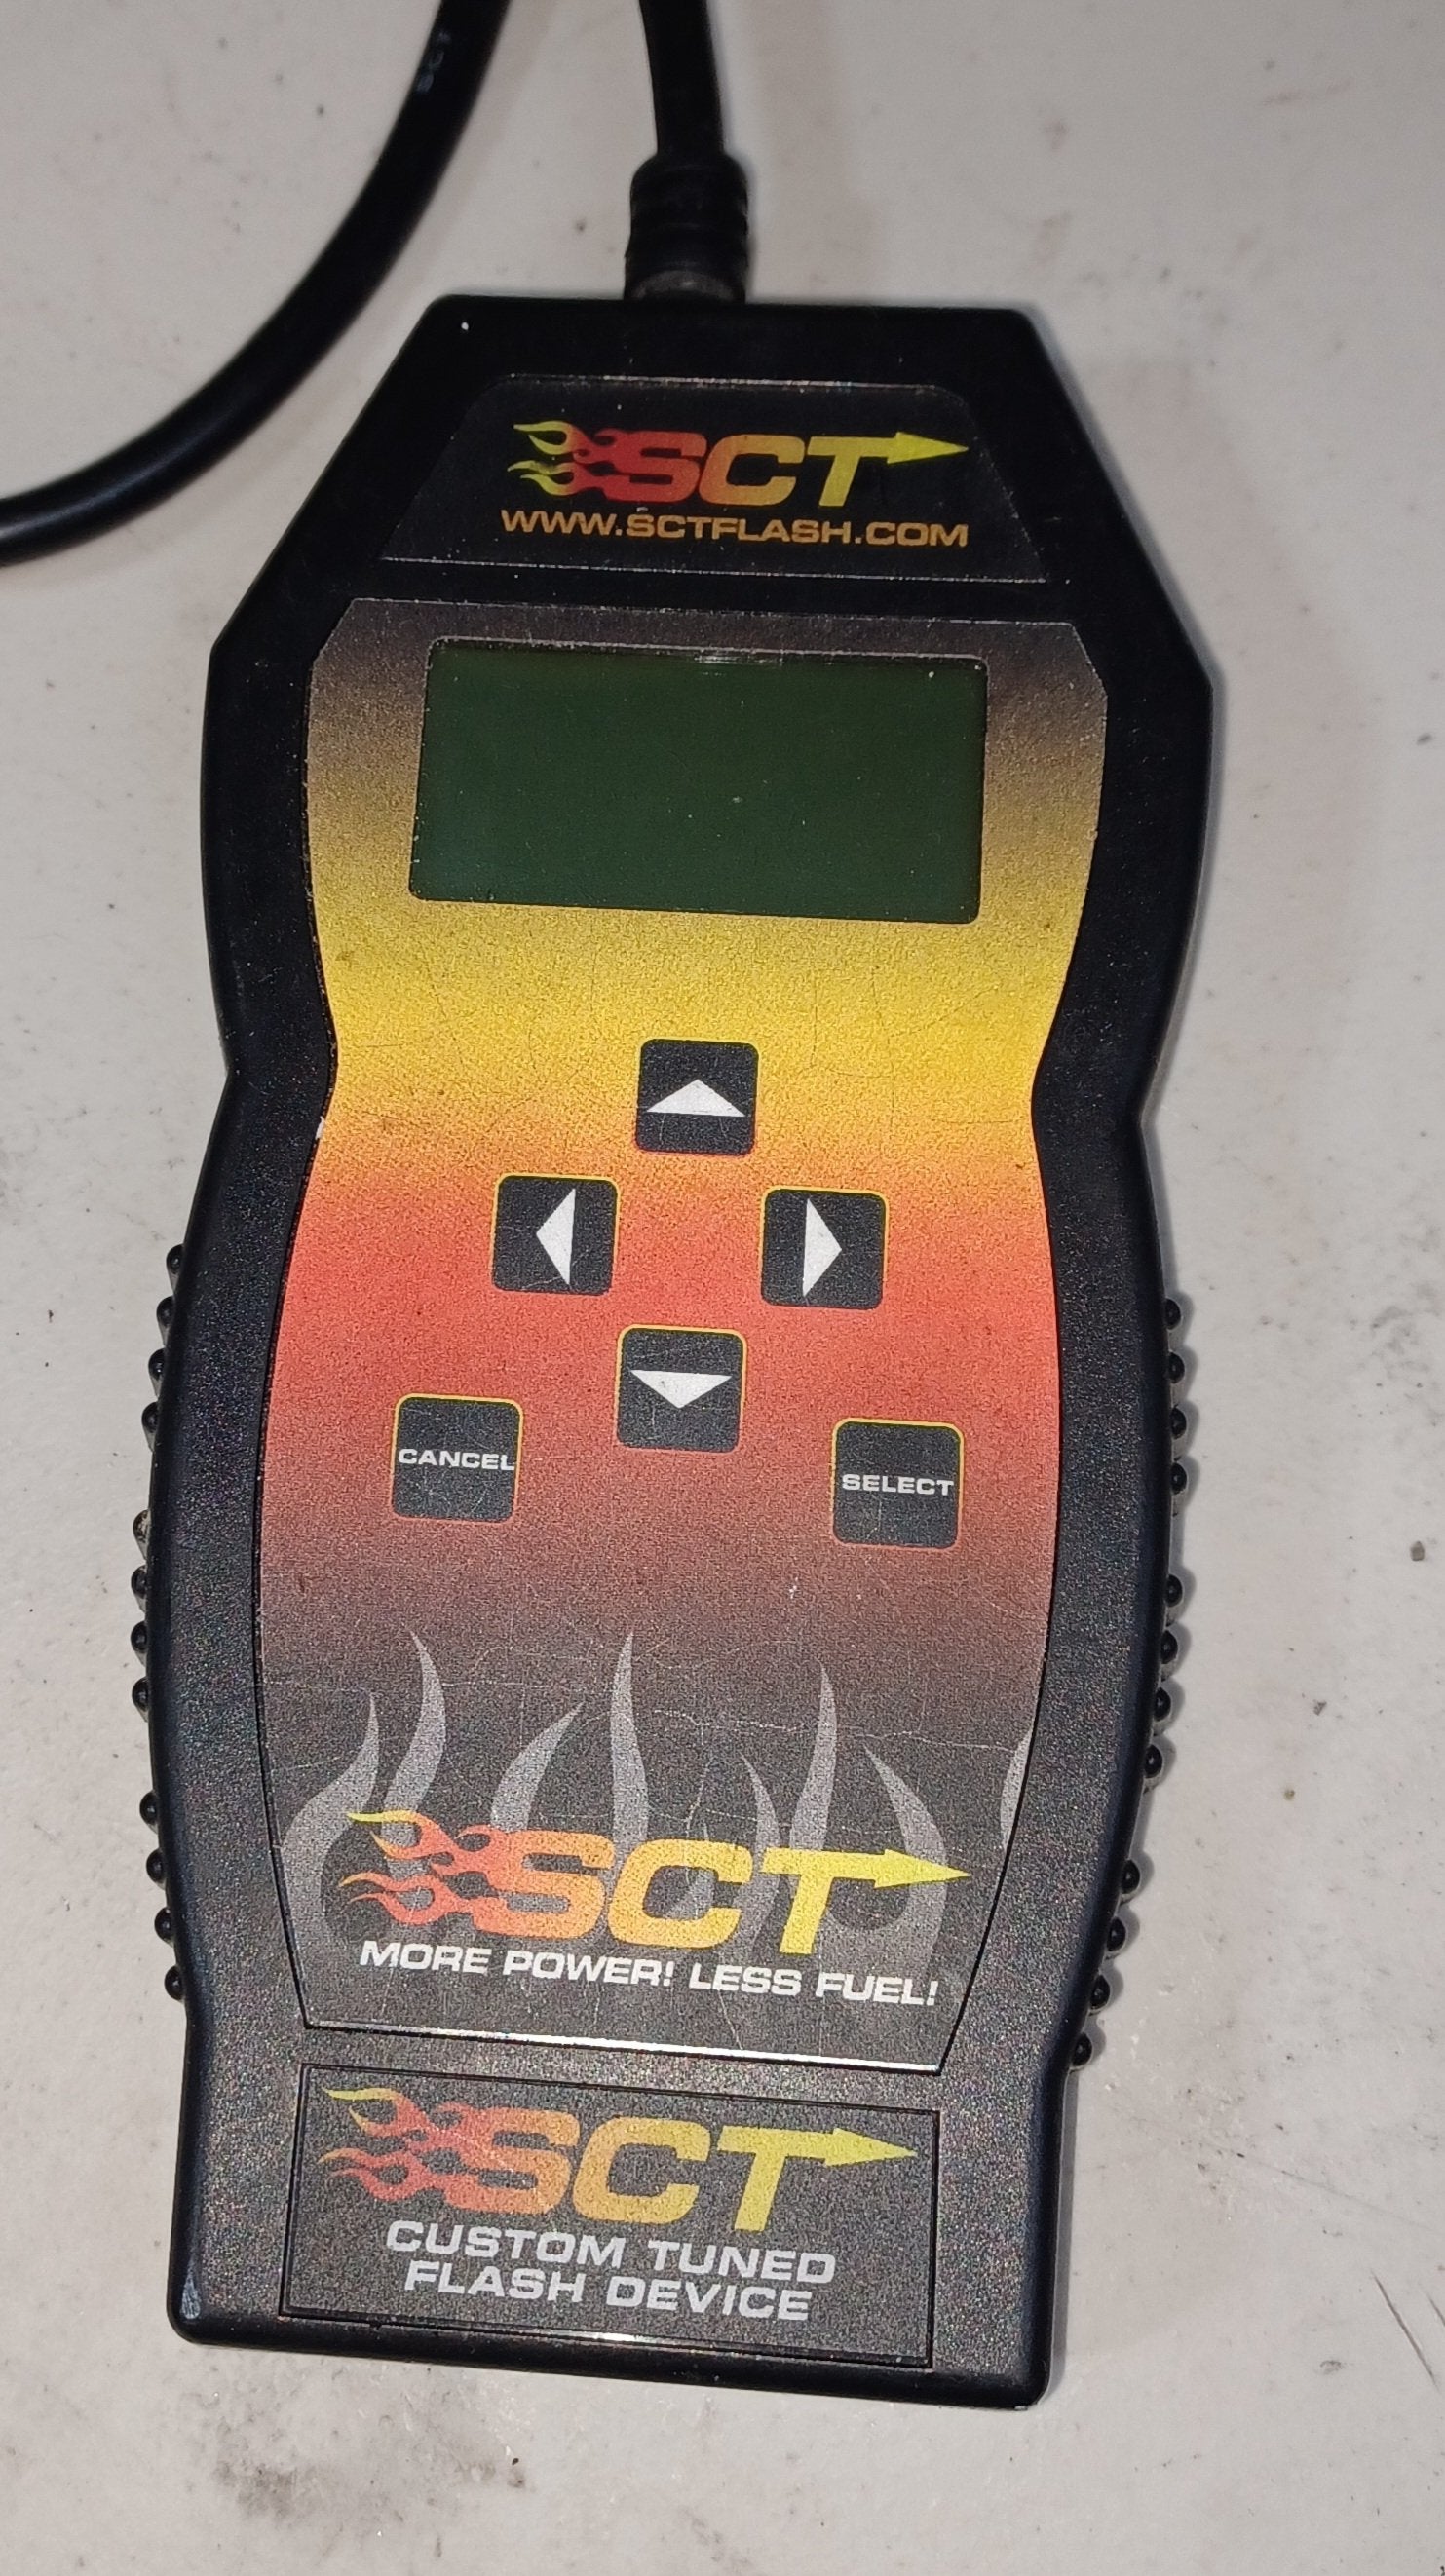 Sct programmer with sct advantage pro tuning software